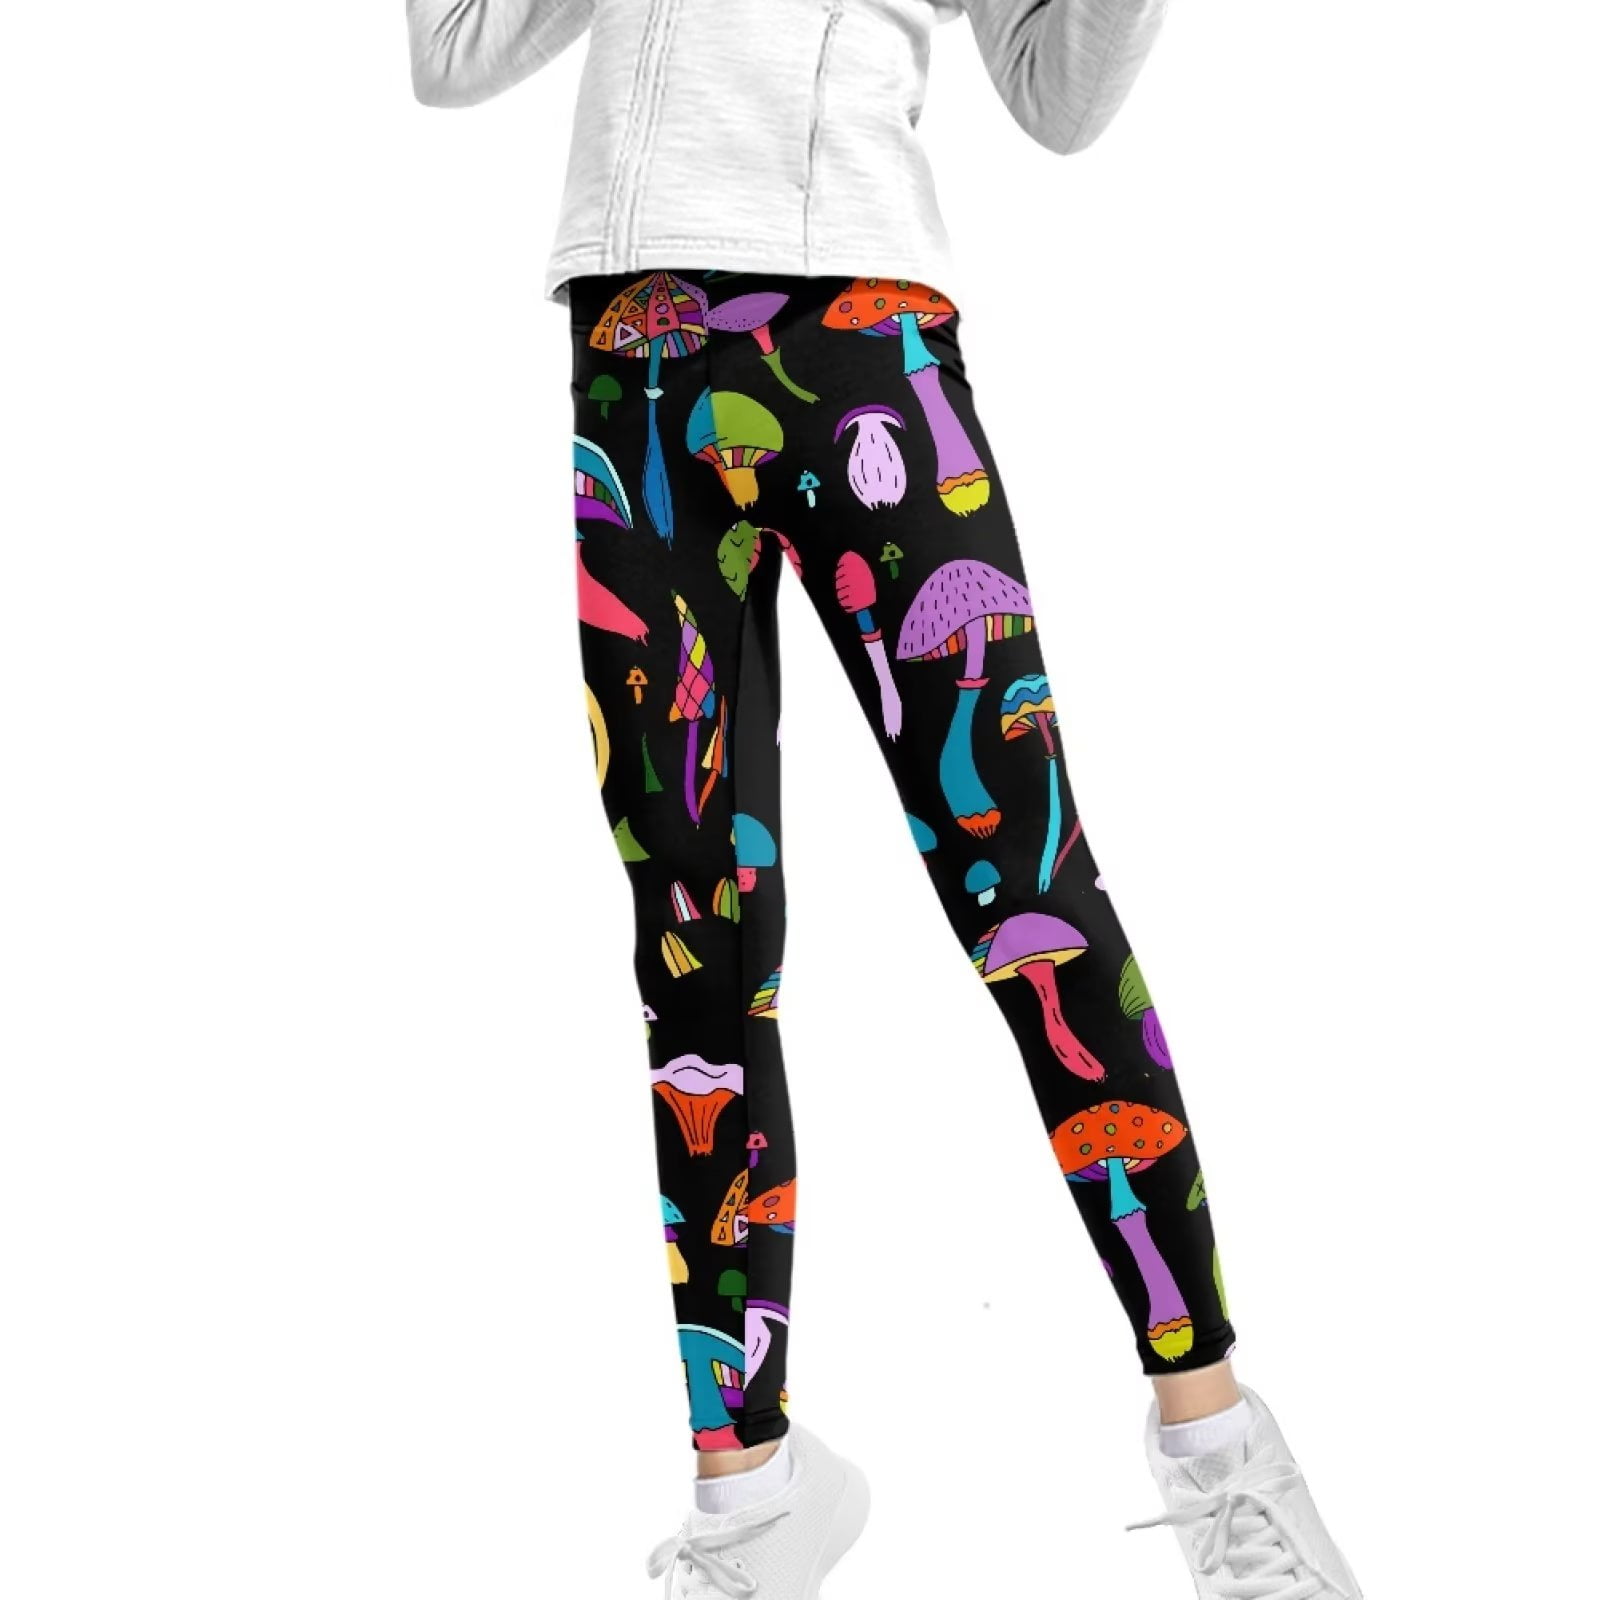 FKELYI Kids Leggings with Cane Candy Size 12-13 Years Elastic Hoilday  Active Tights Comfortable Yoga Pants High Waisted Butt Lift for Teenagers 